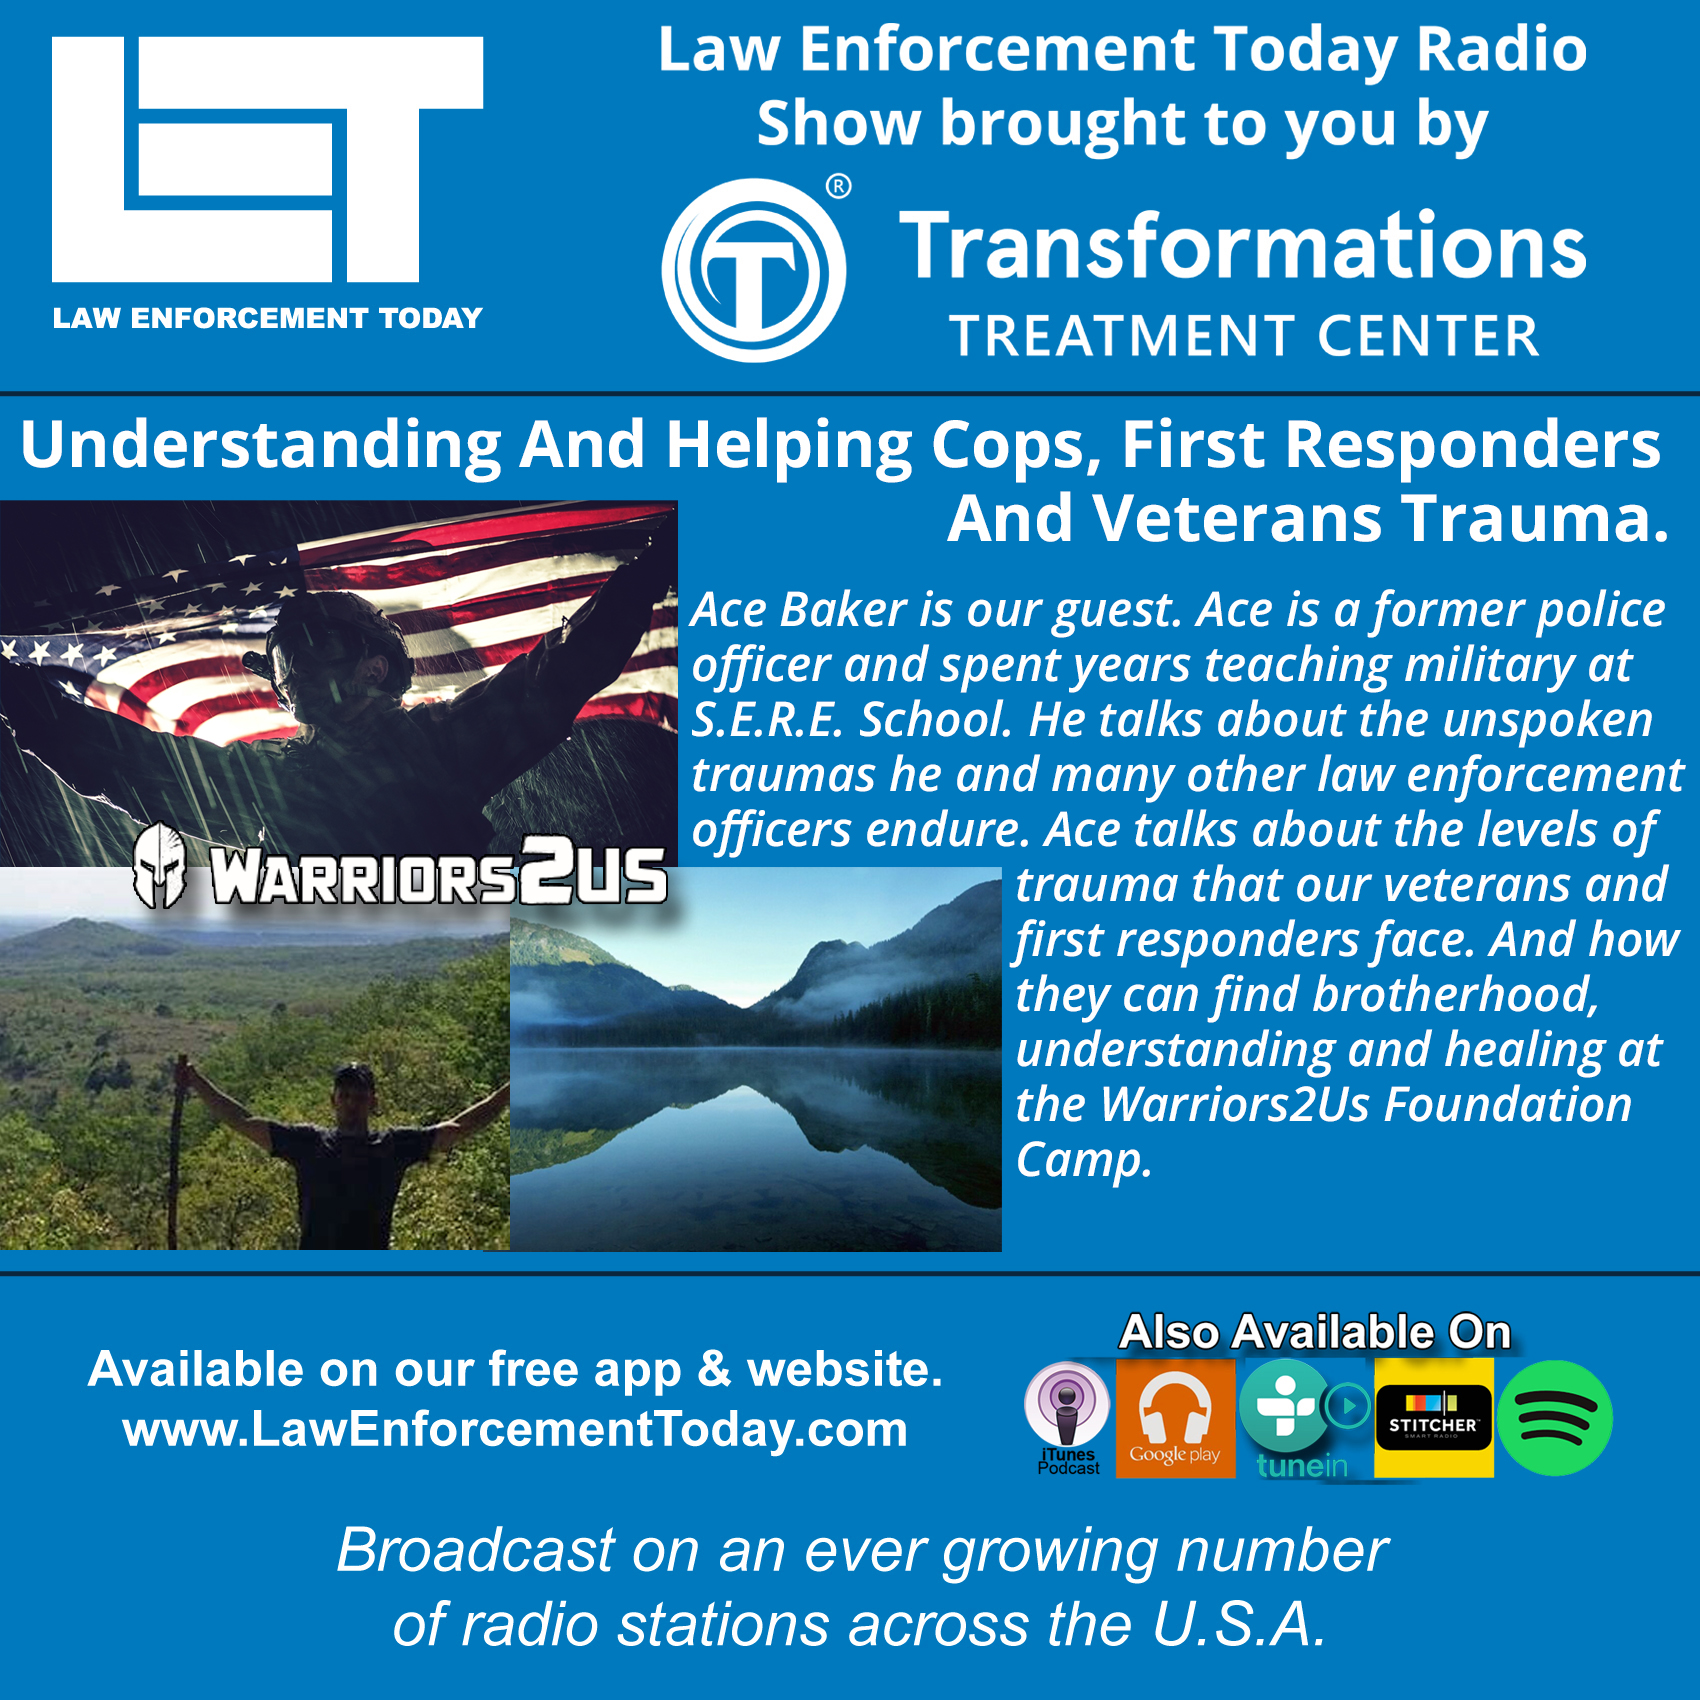 S4E30: Understanding And Helping Cops, First Responders And Veterans Trauma.